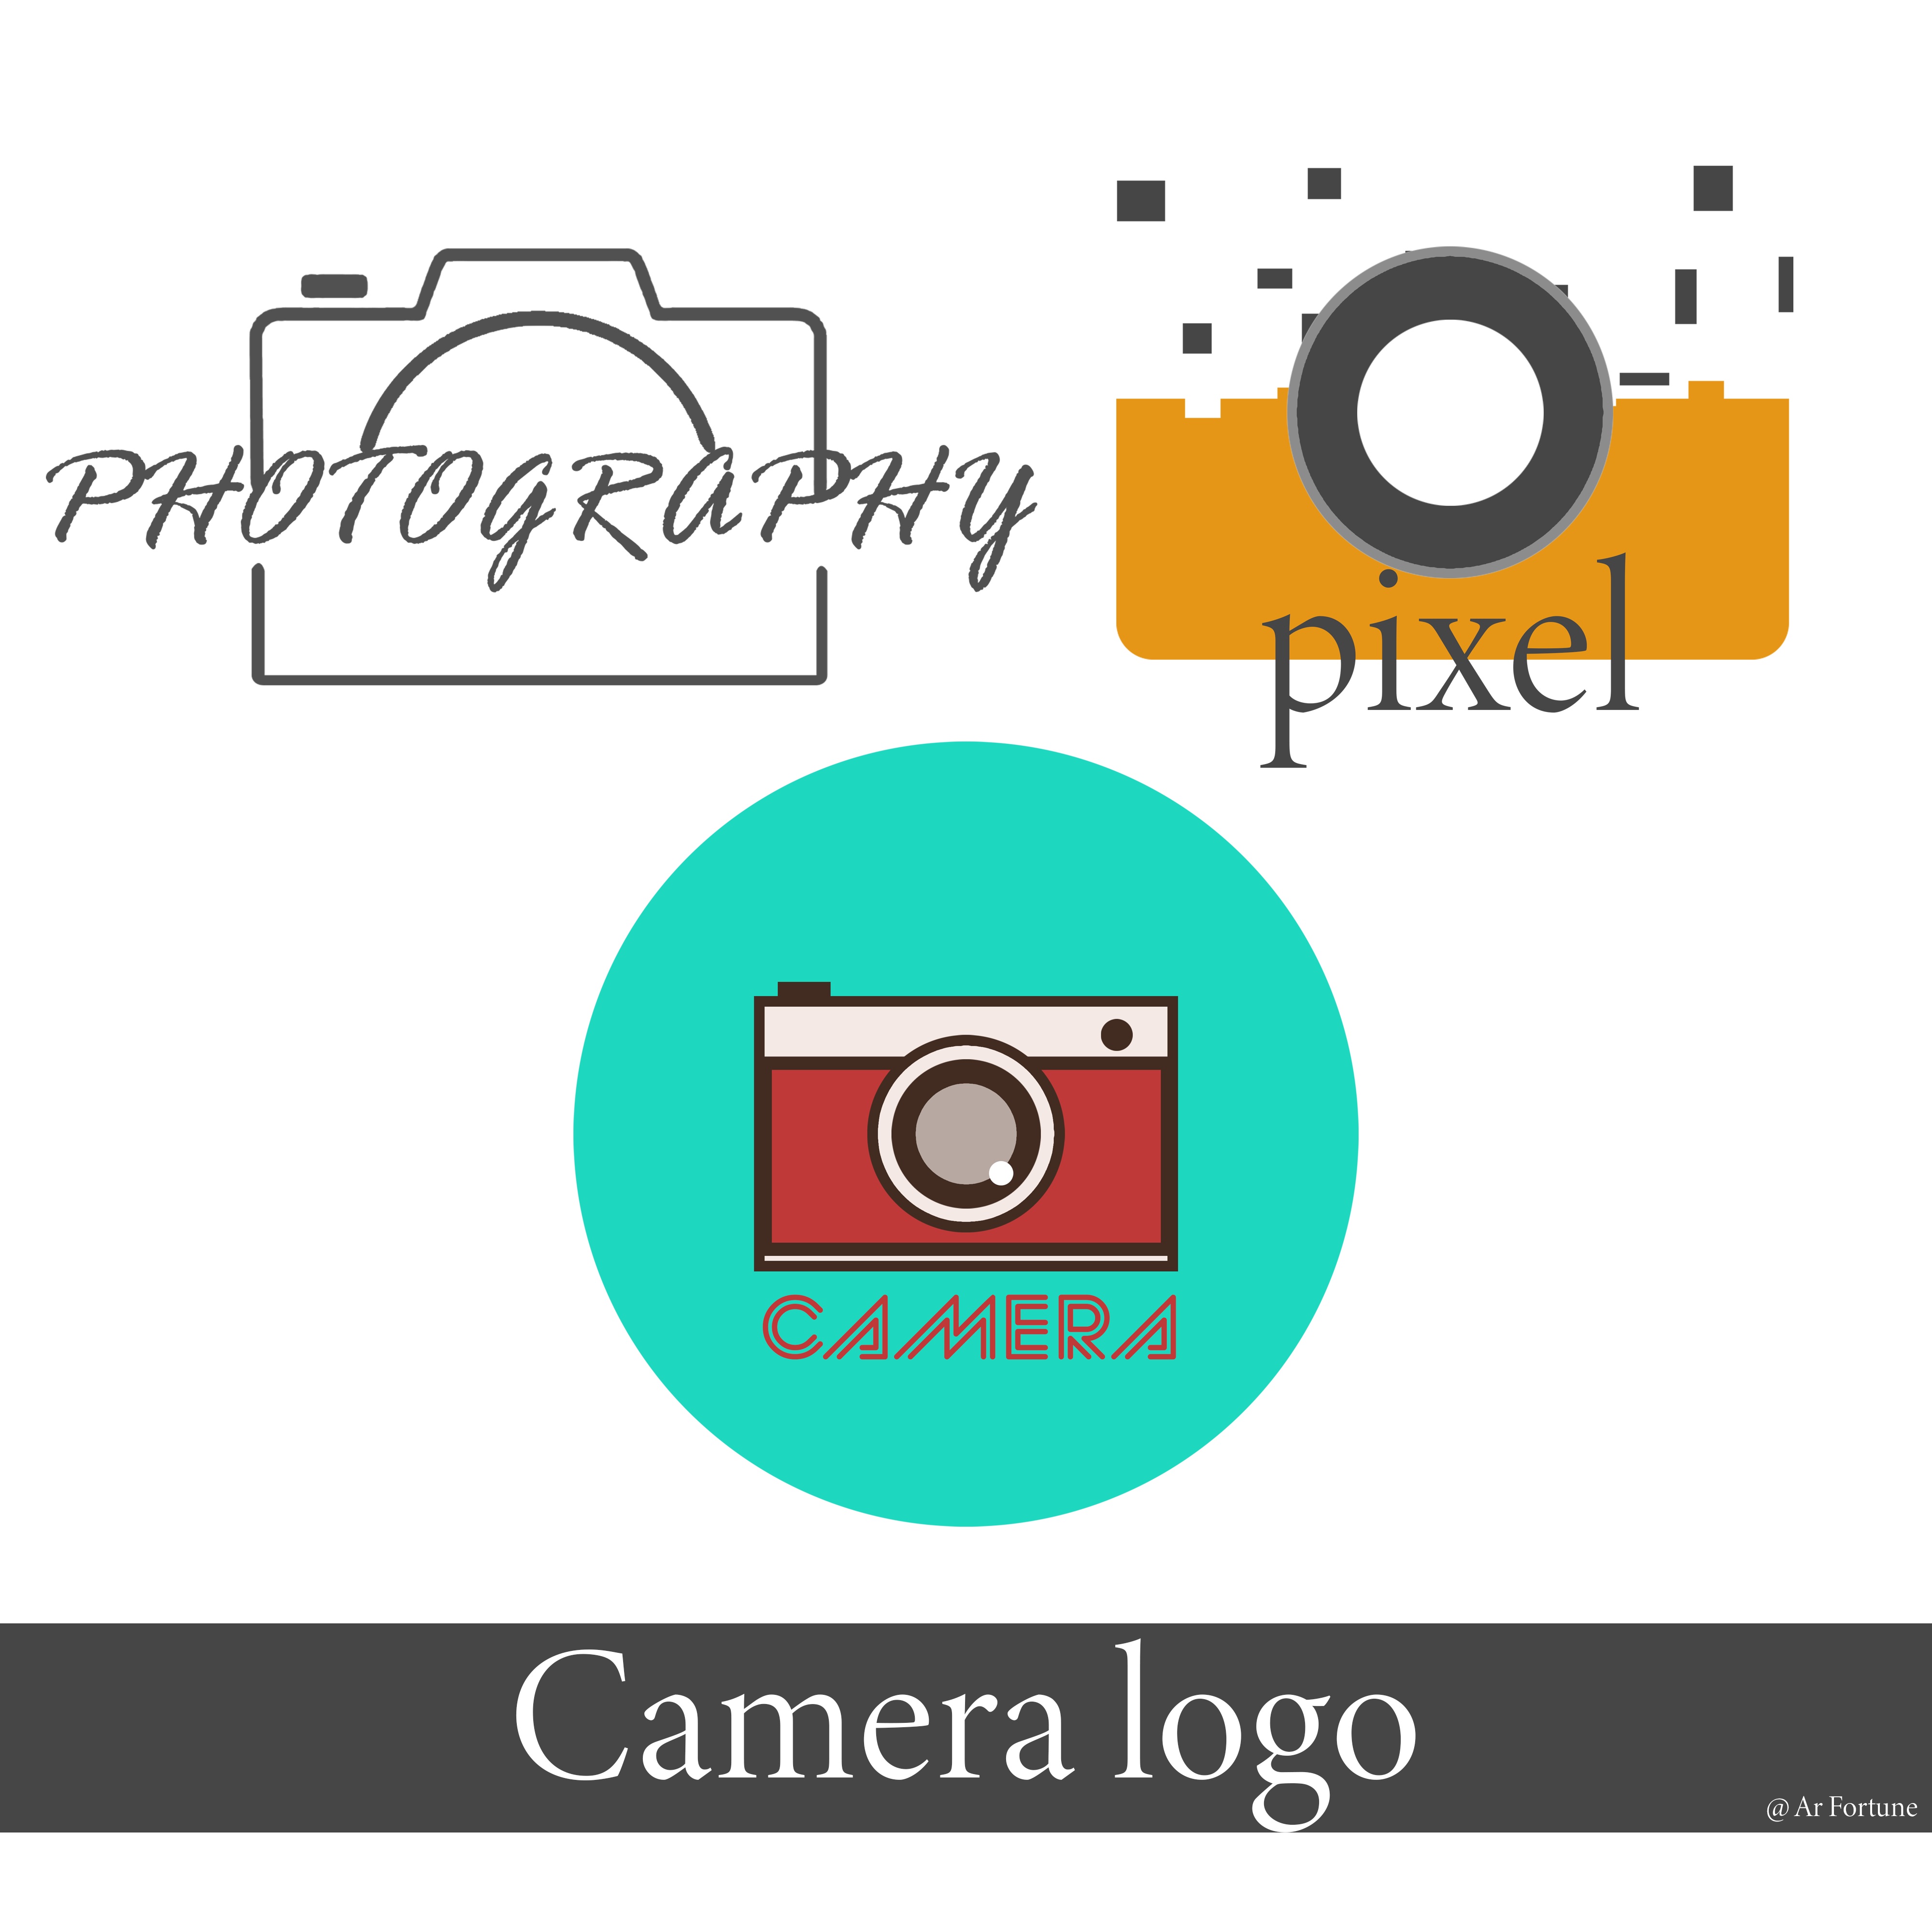 Camera logo is shown in three different colors.